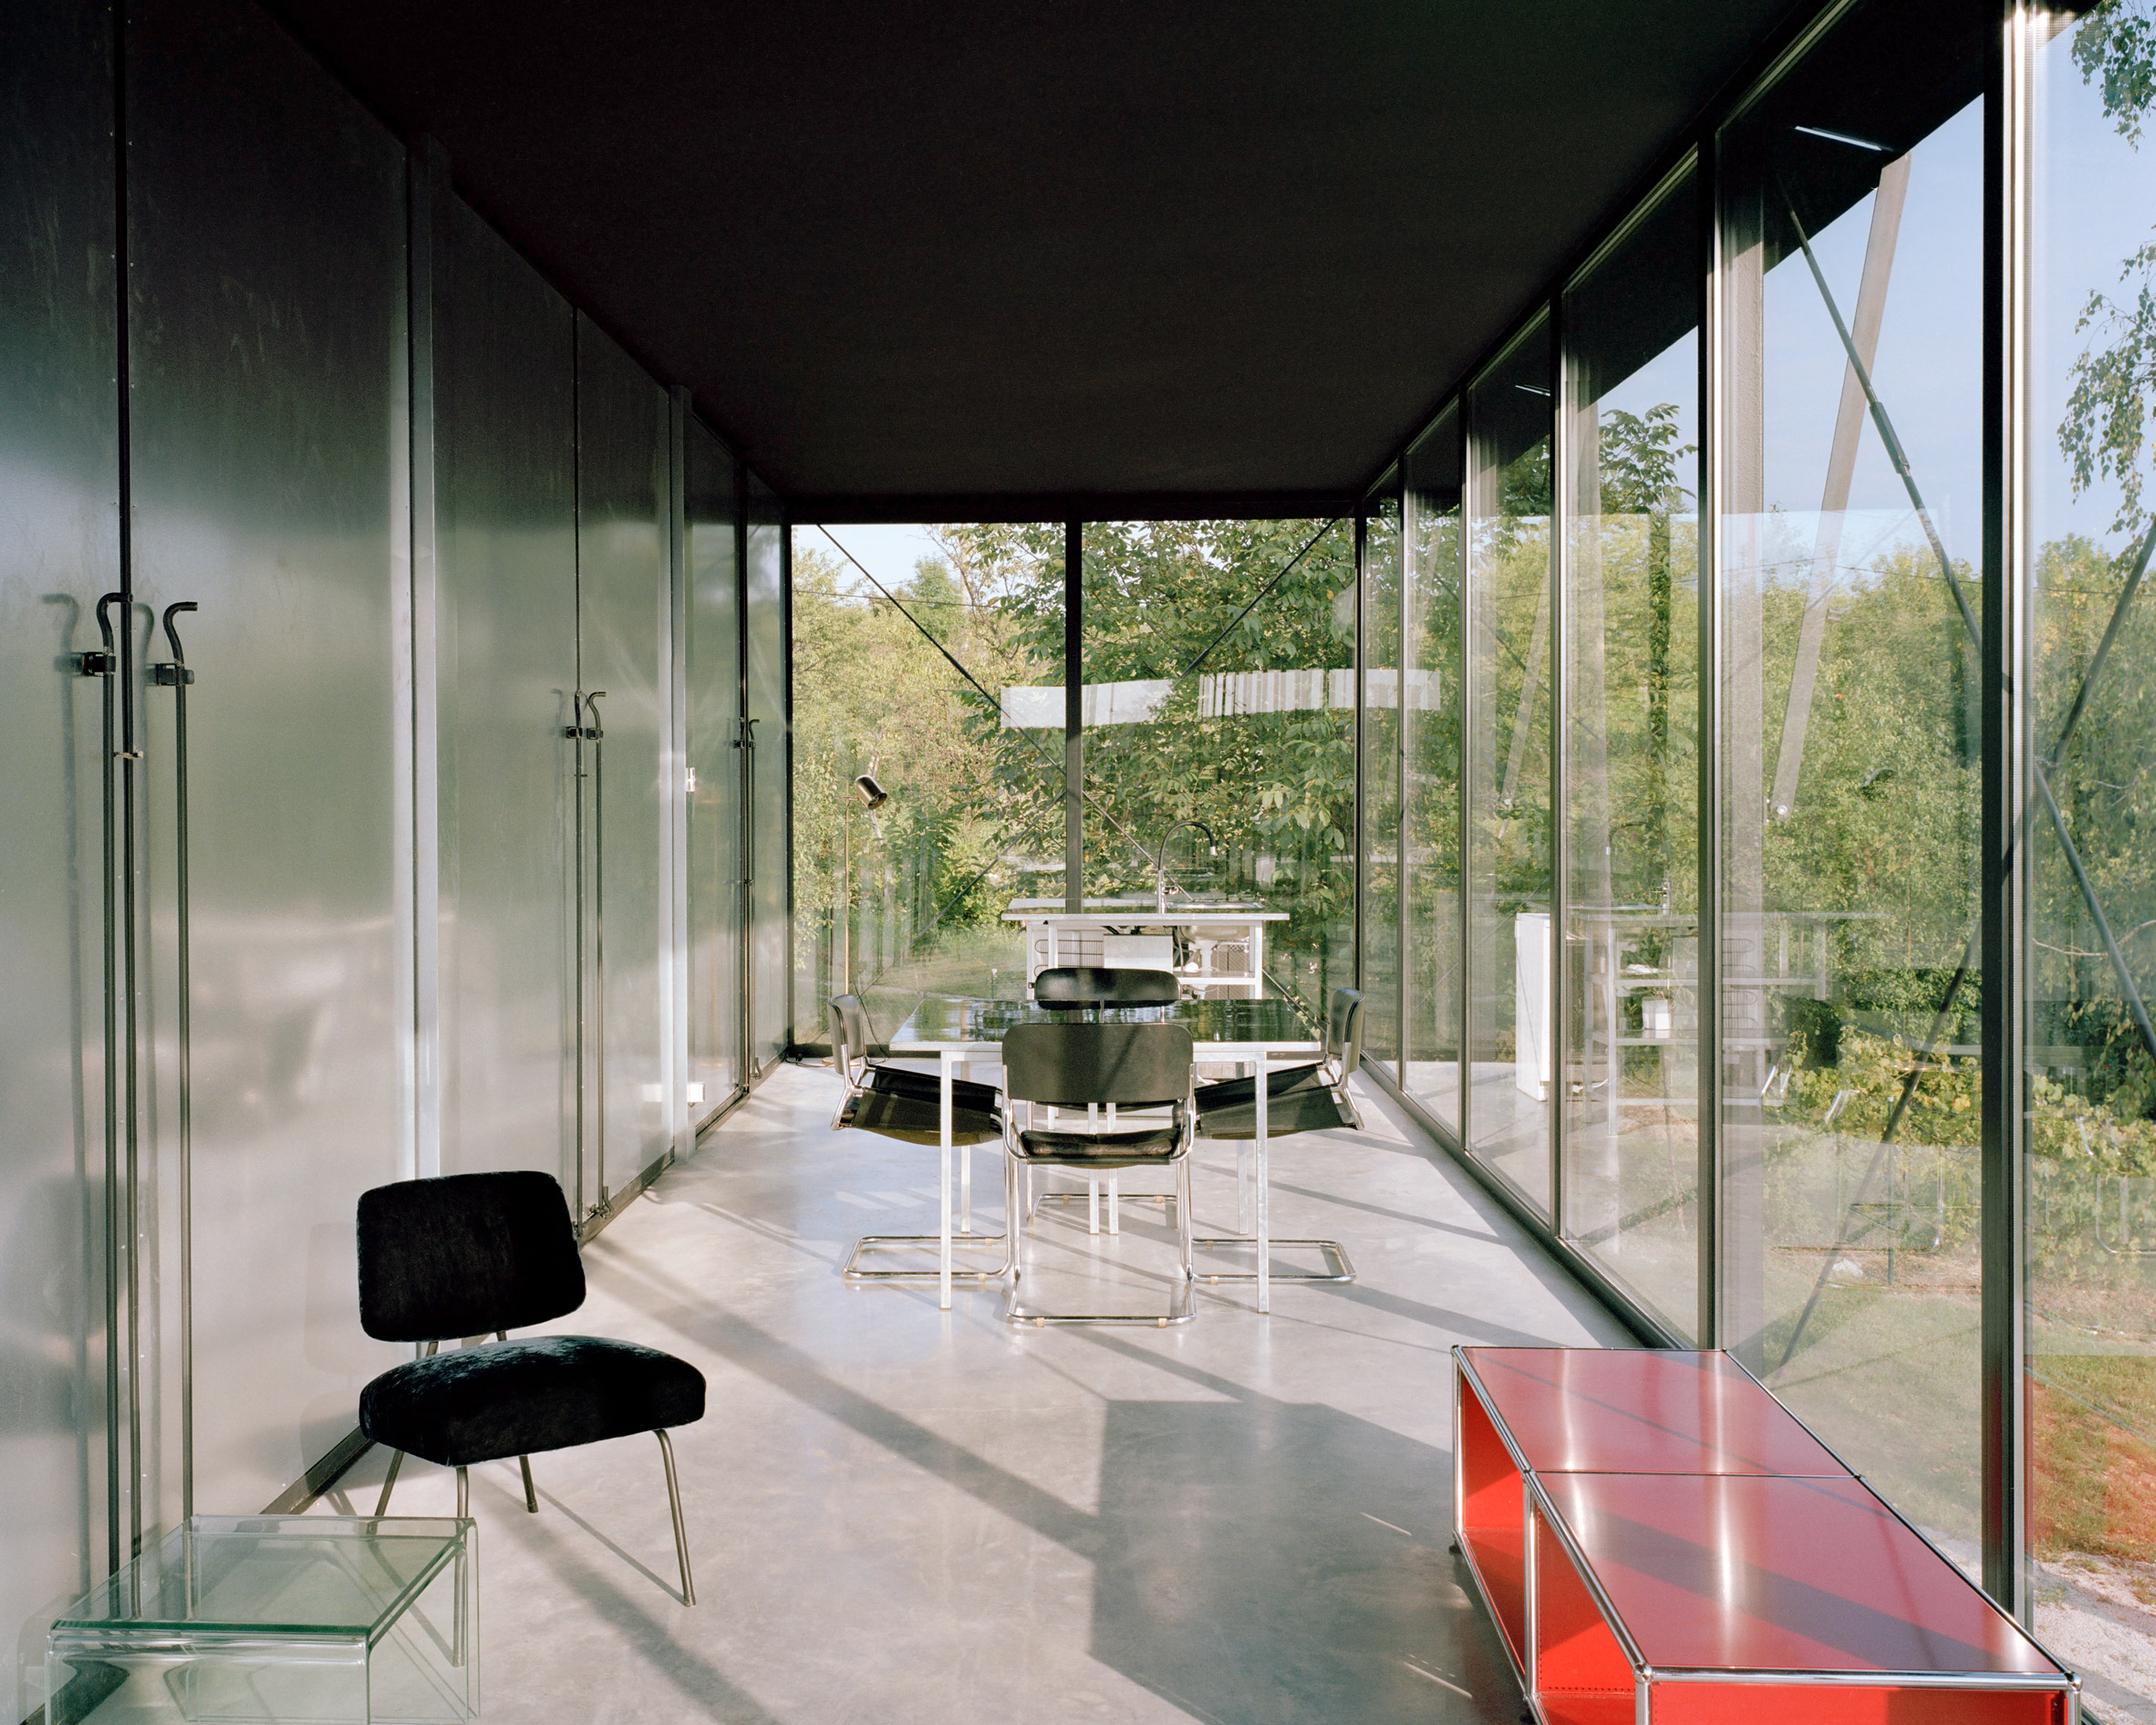 A living room with floor-to-ceiling glass windows